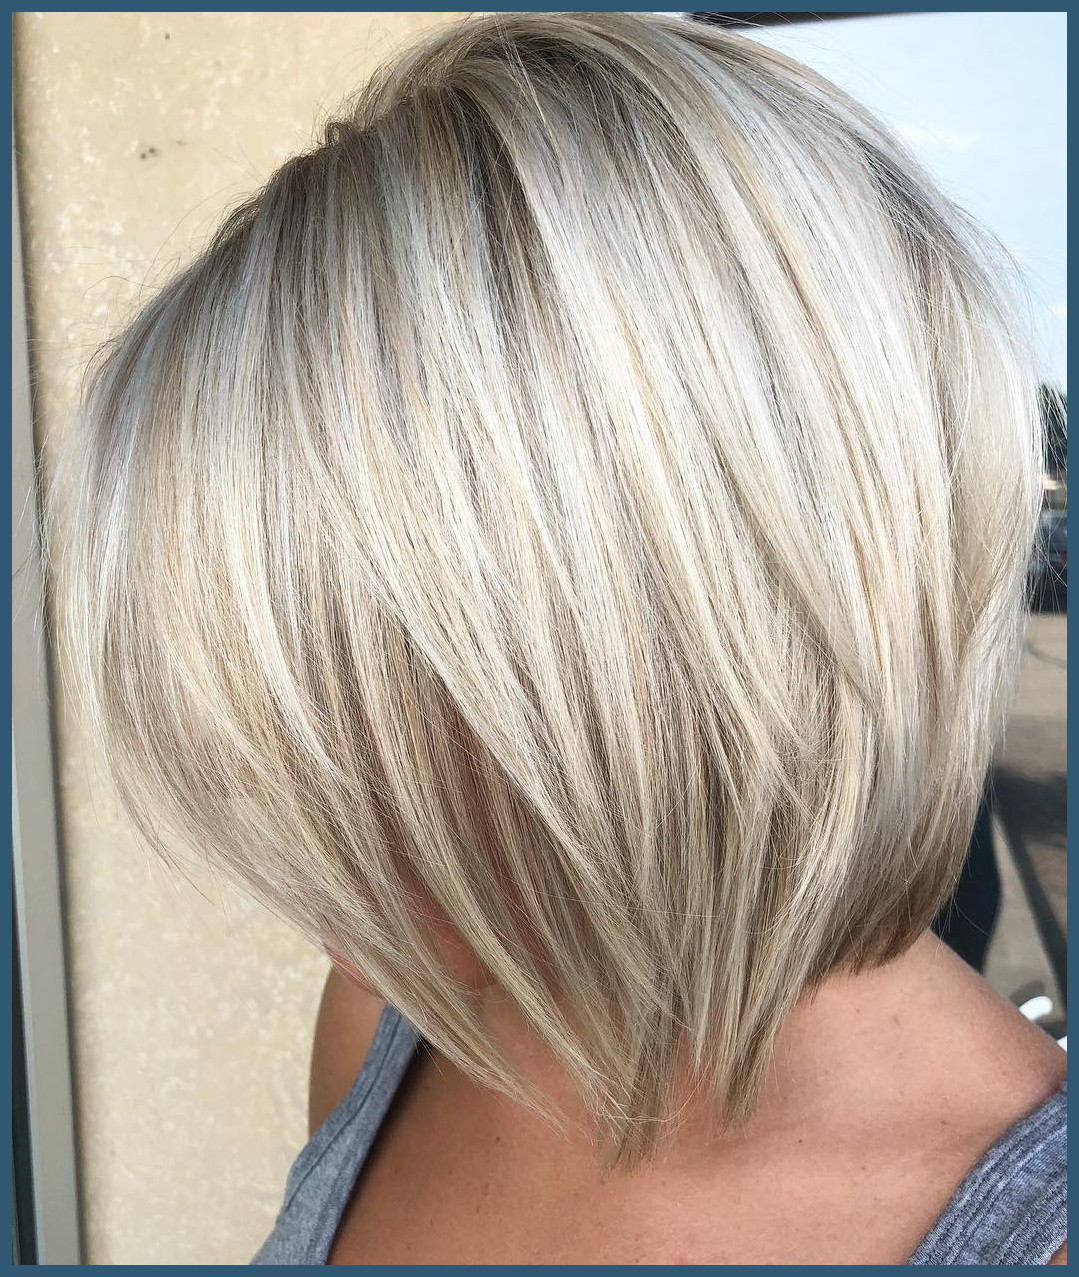 bob hairstyles for fine thin hair 4032 45 Short Hairstyles for Fine Hair to Rock in 2019